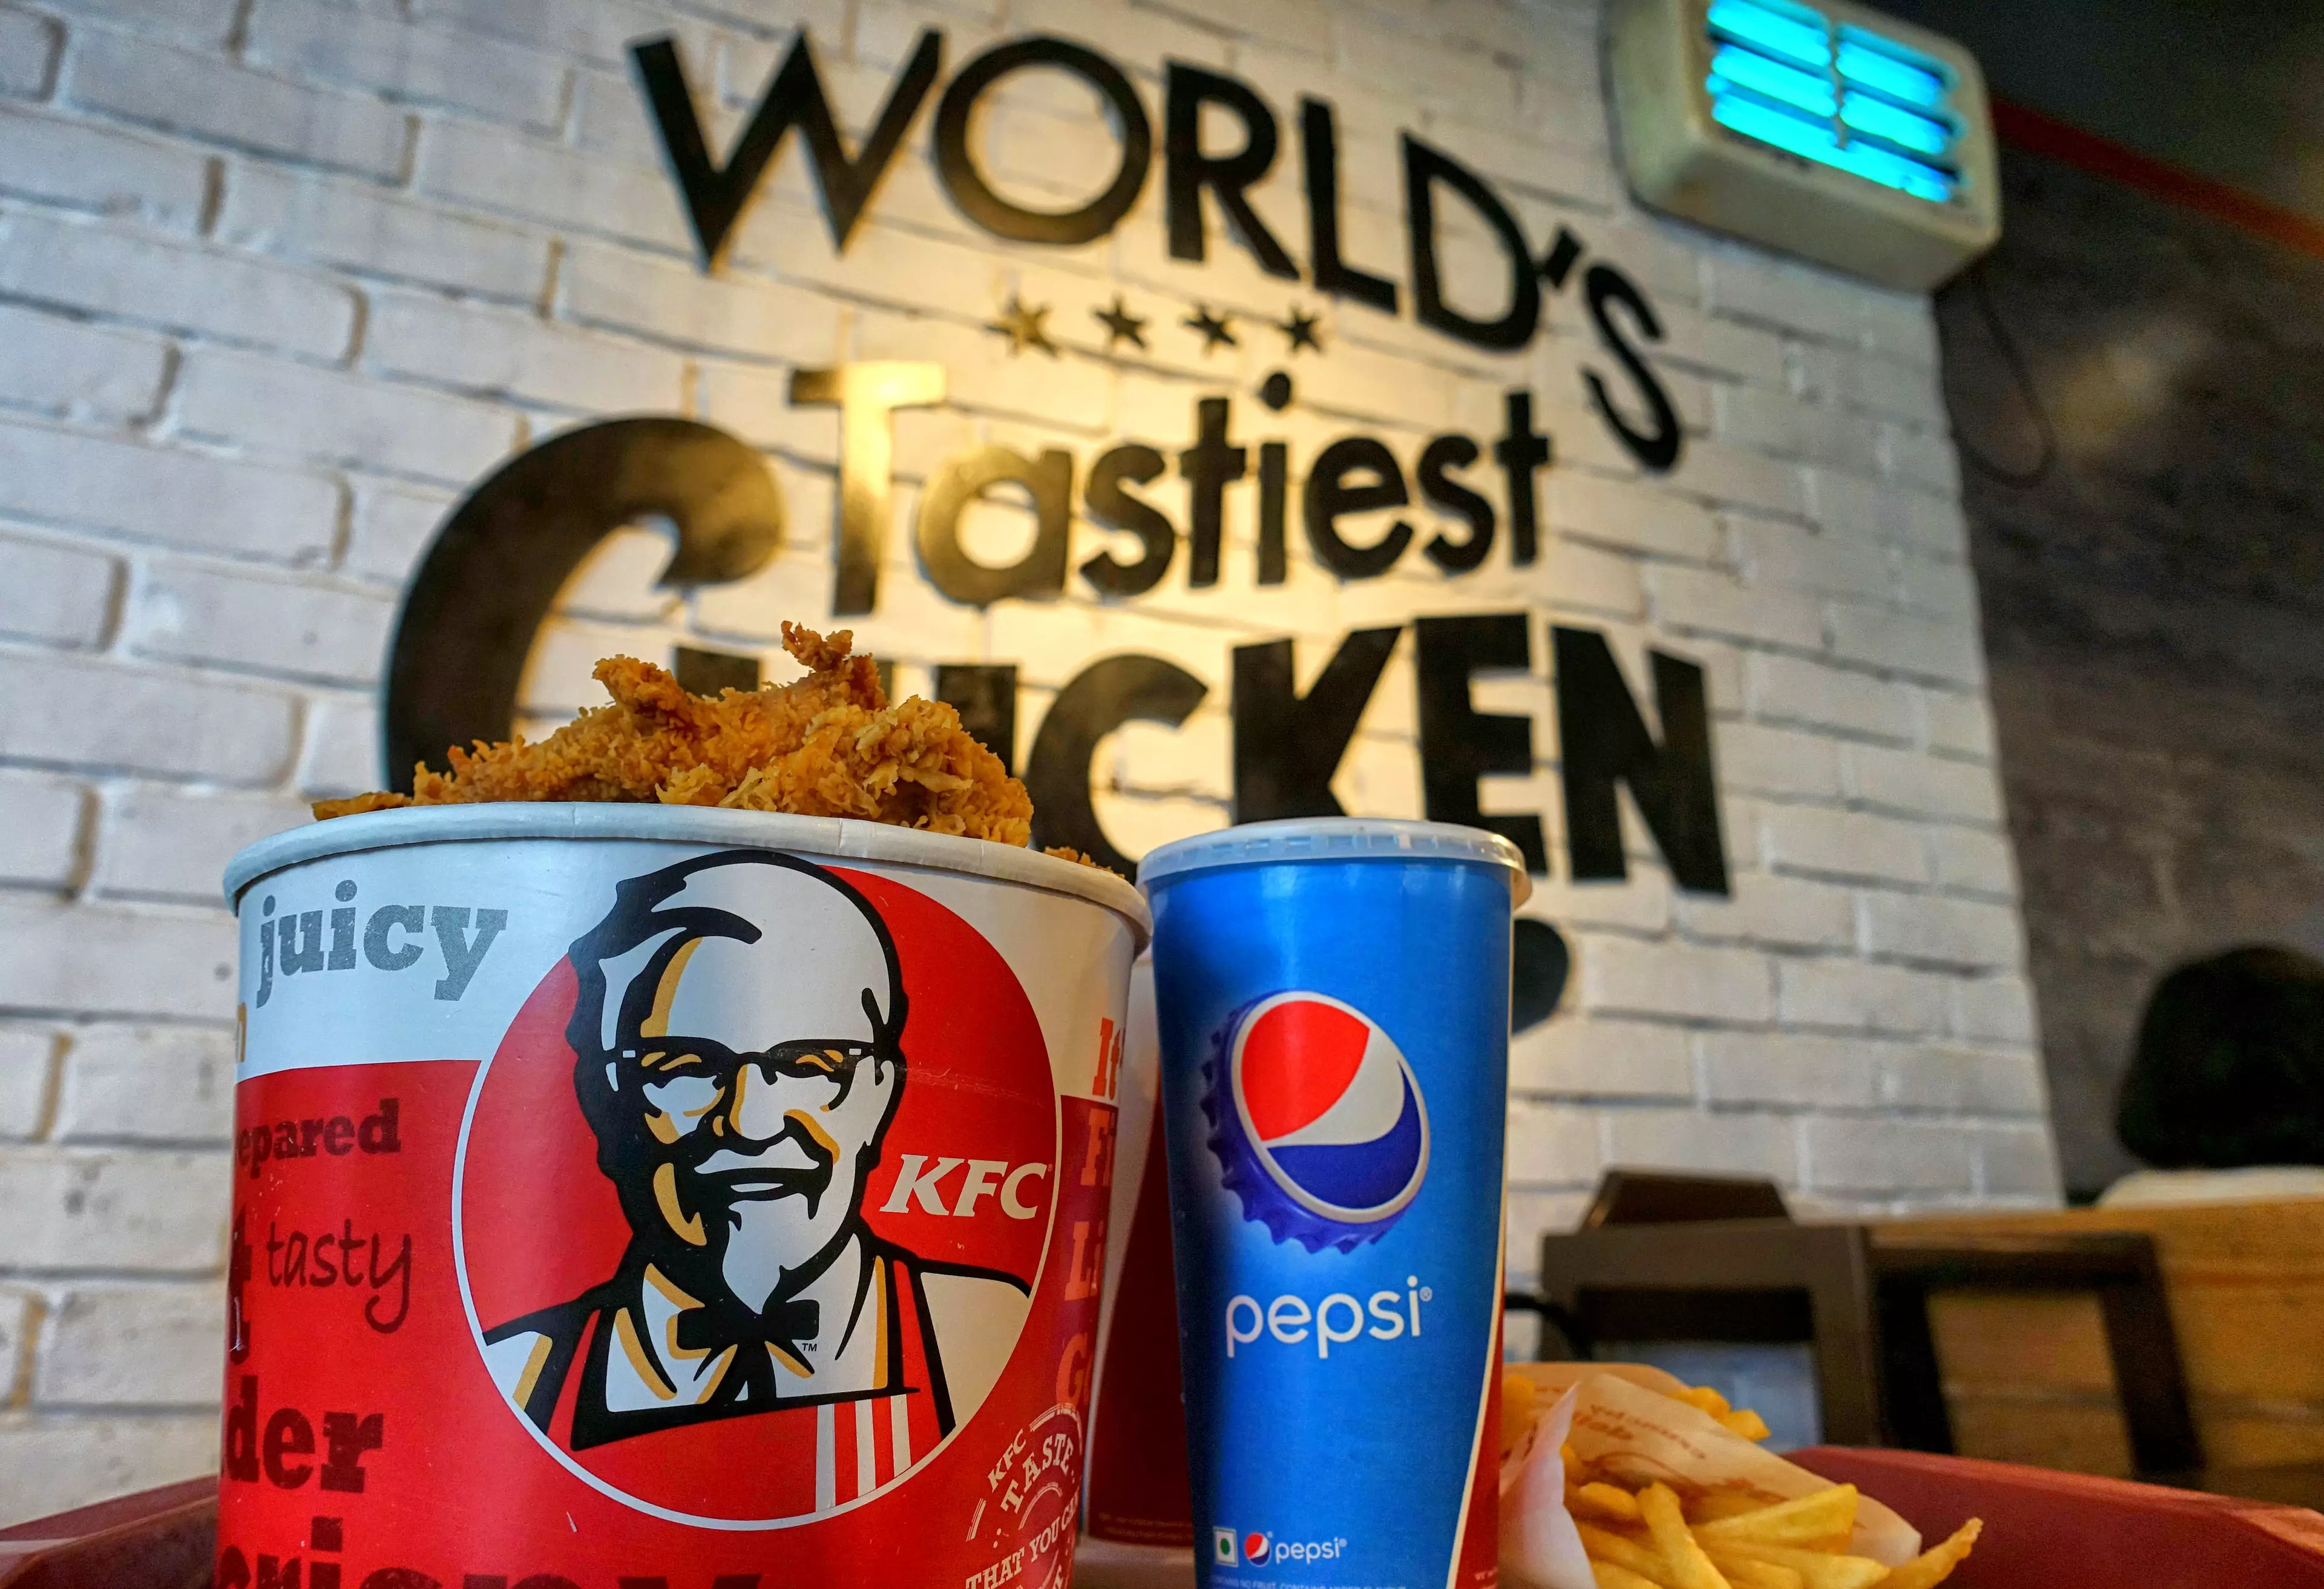 The crisps double up as vouchers for the fast-food chain (